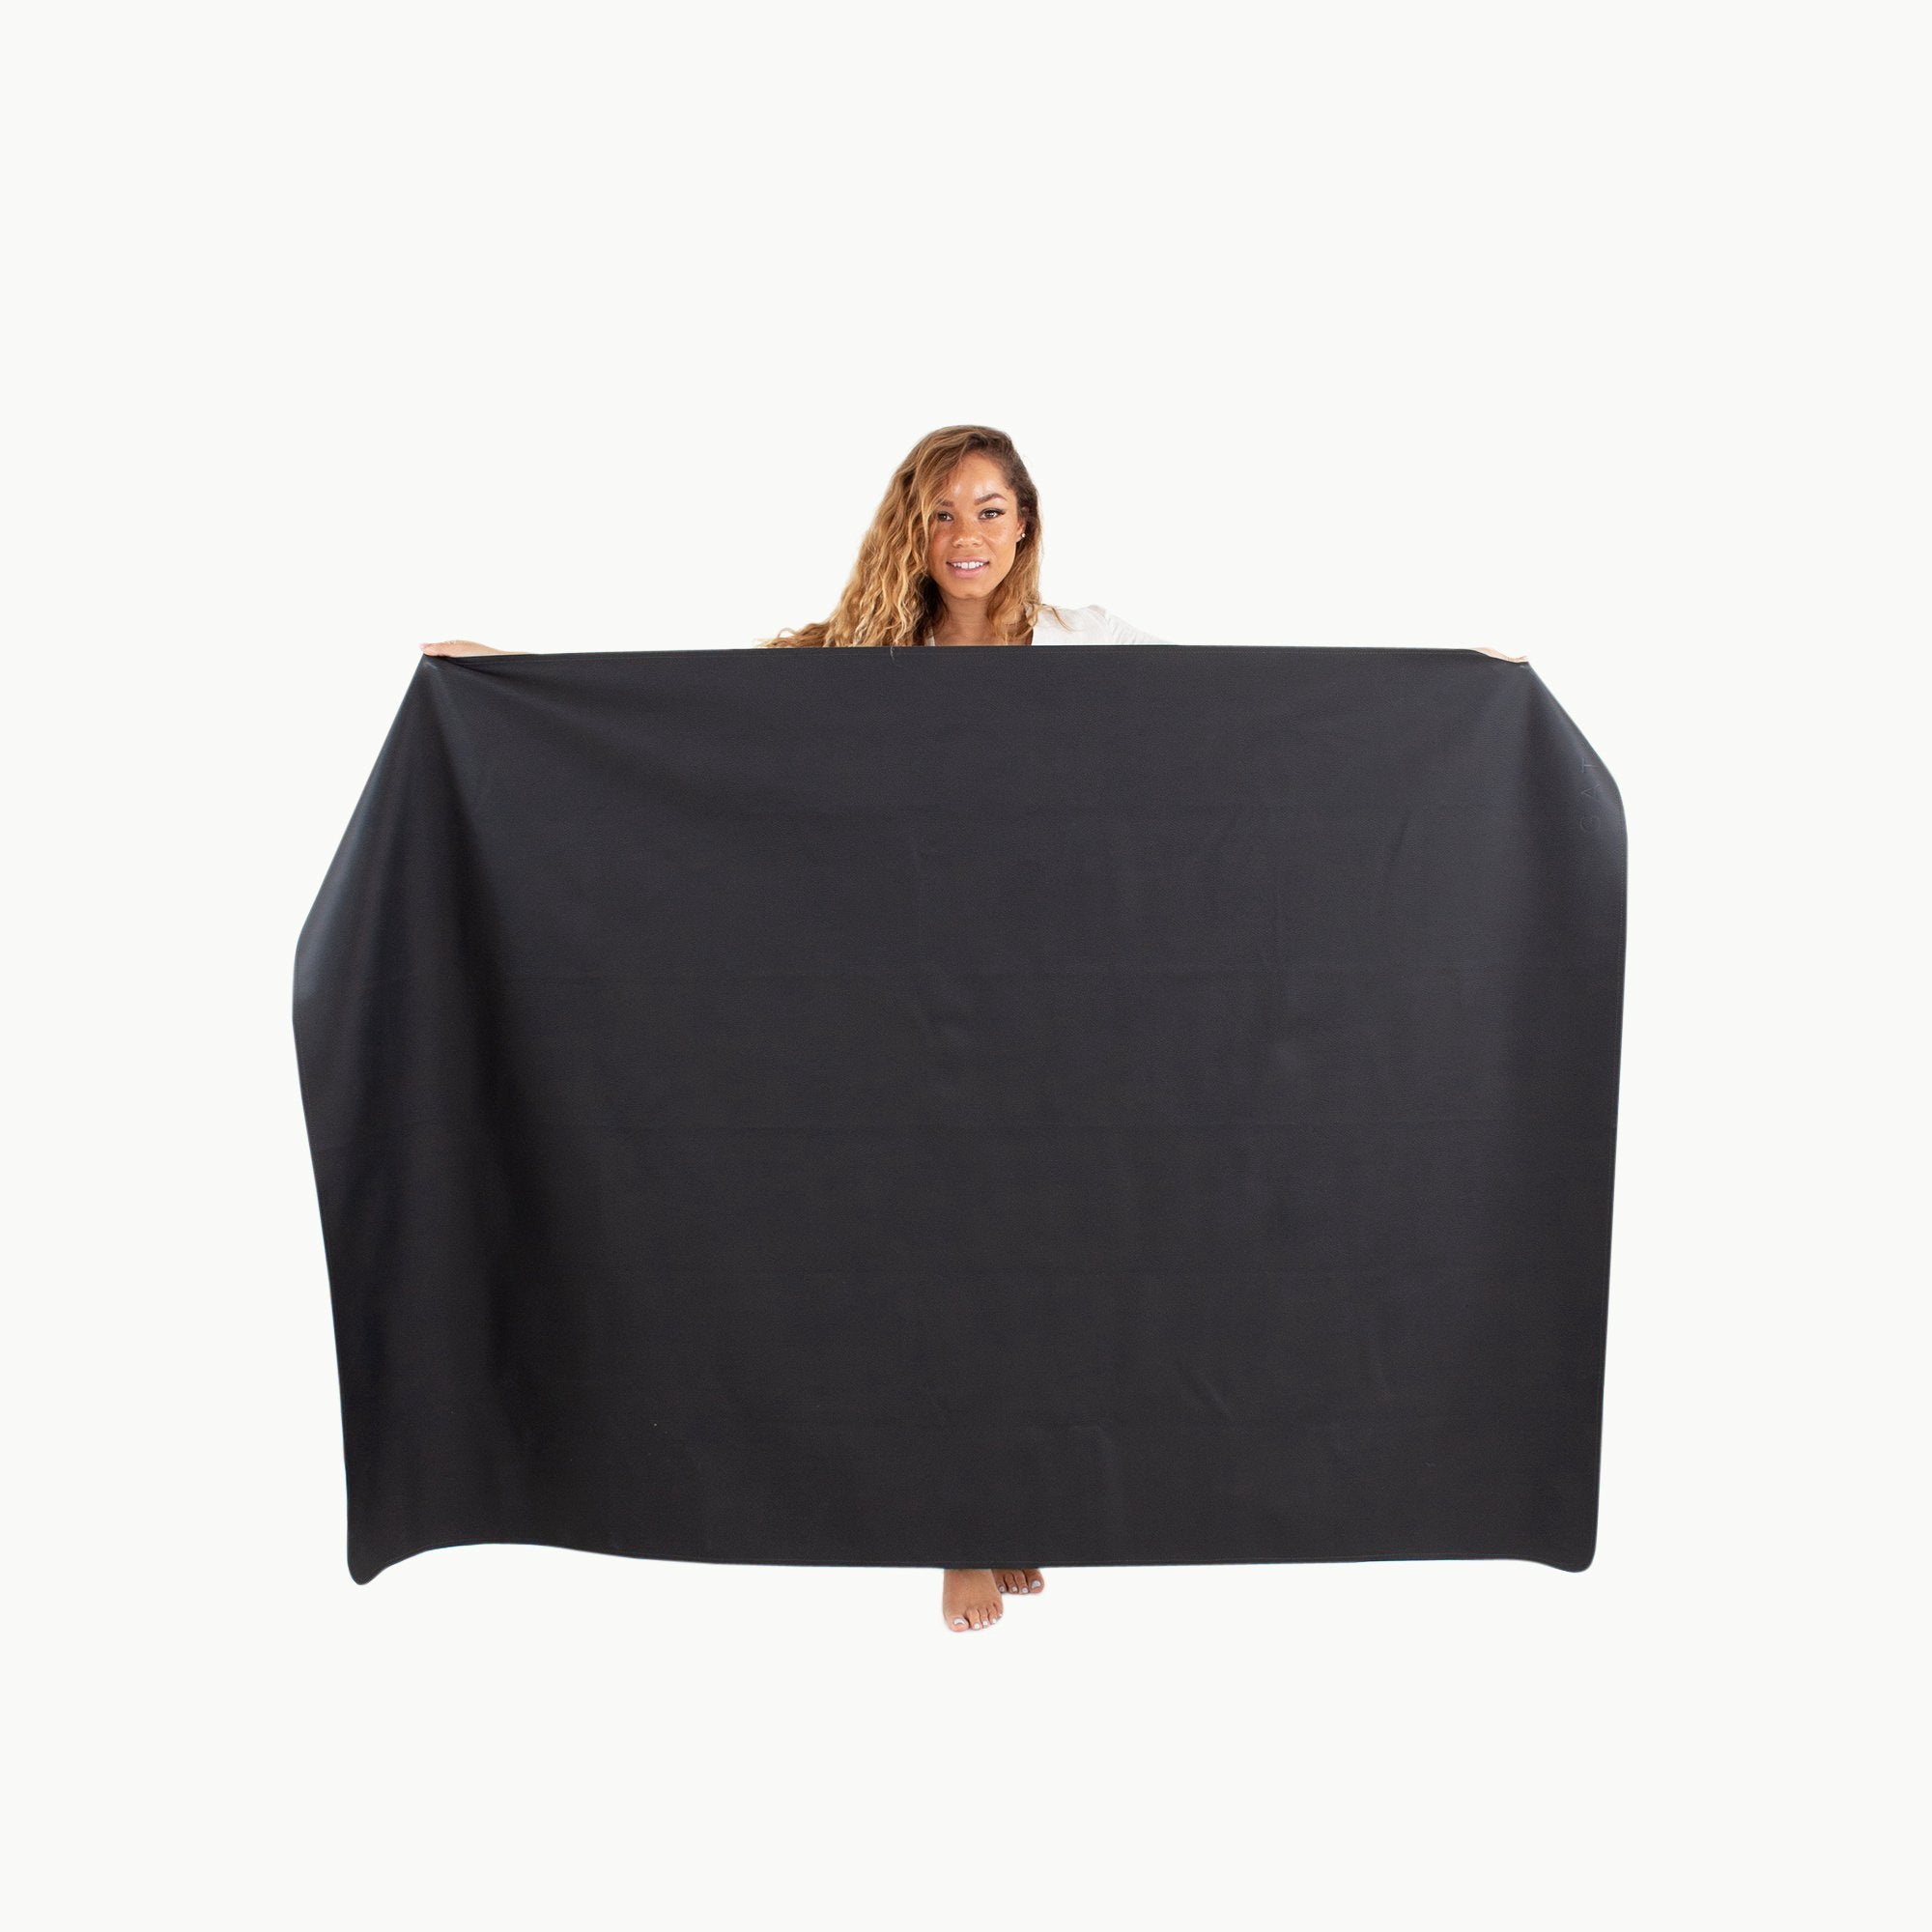 Raven / 6 Foot@woman holding raven tablecloth